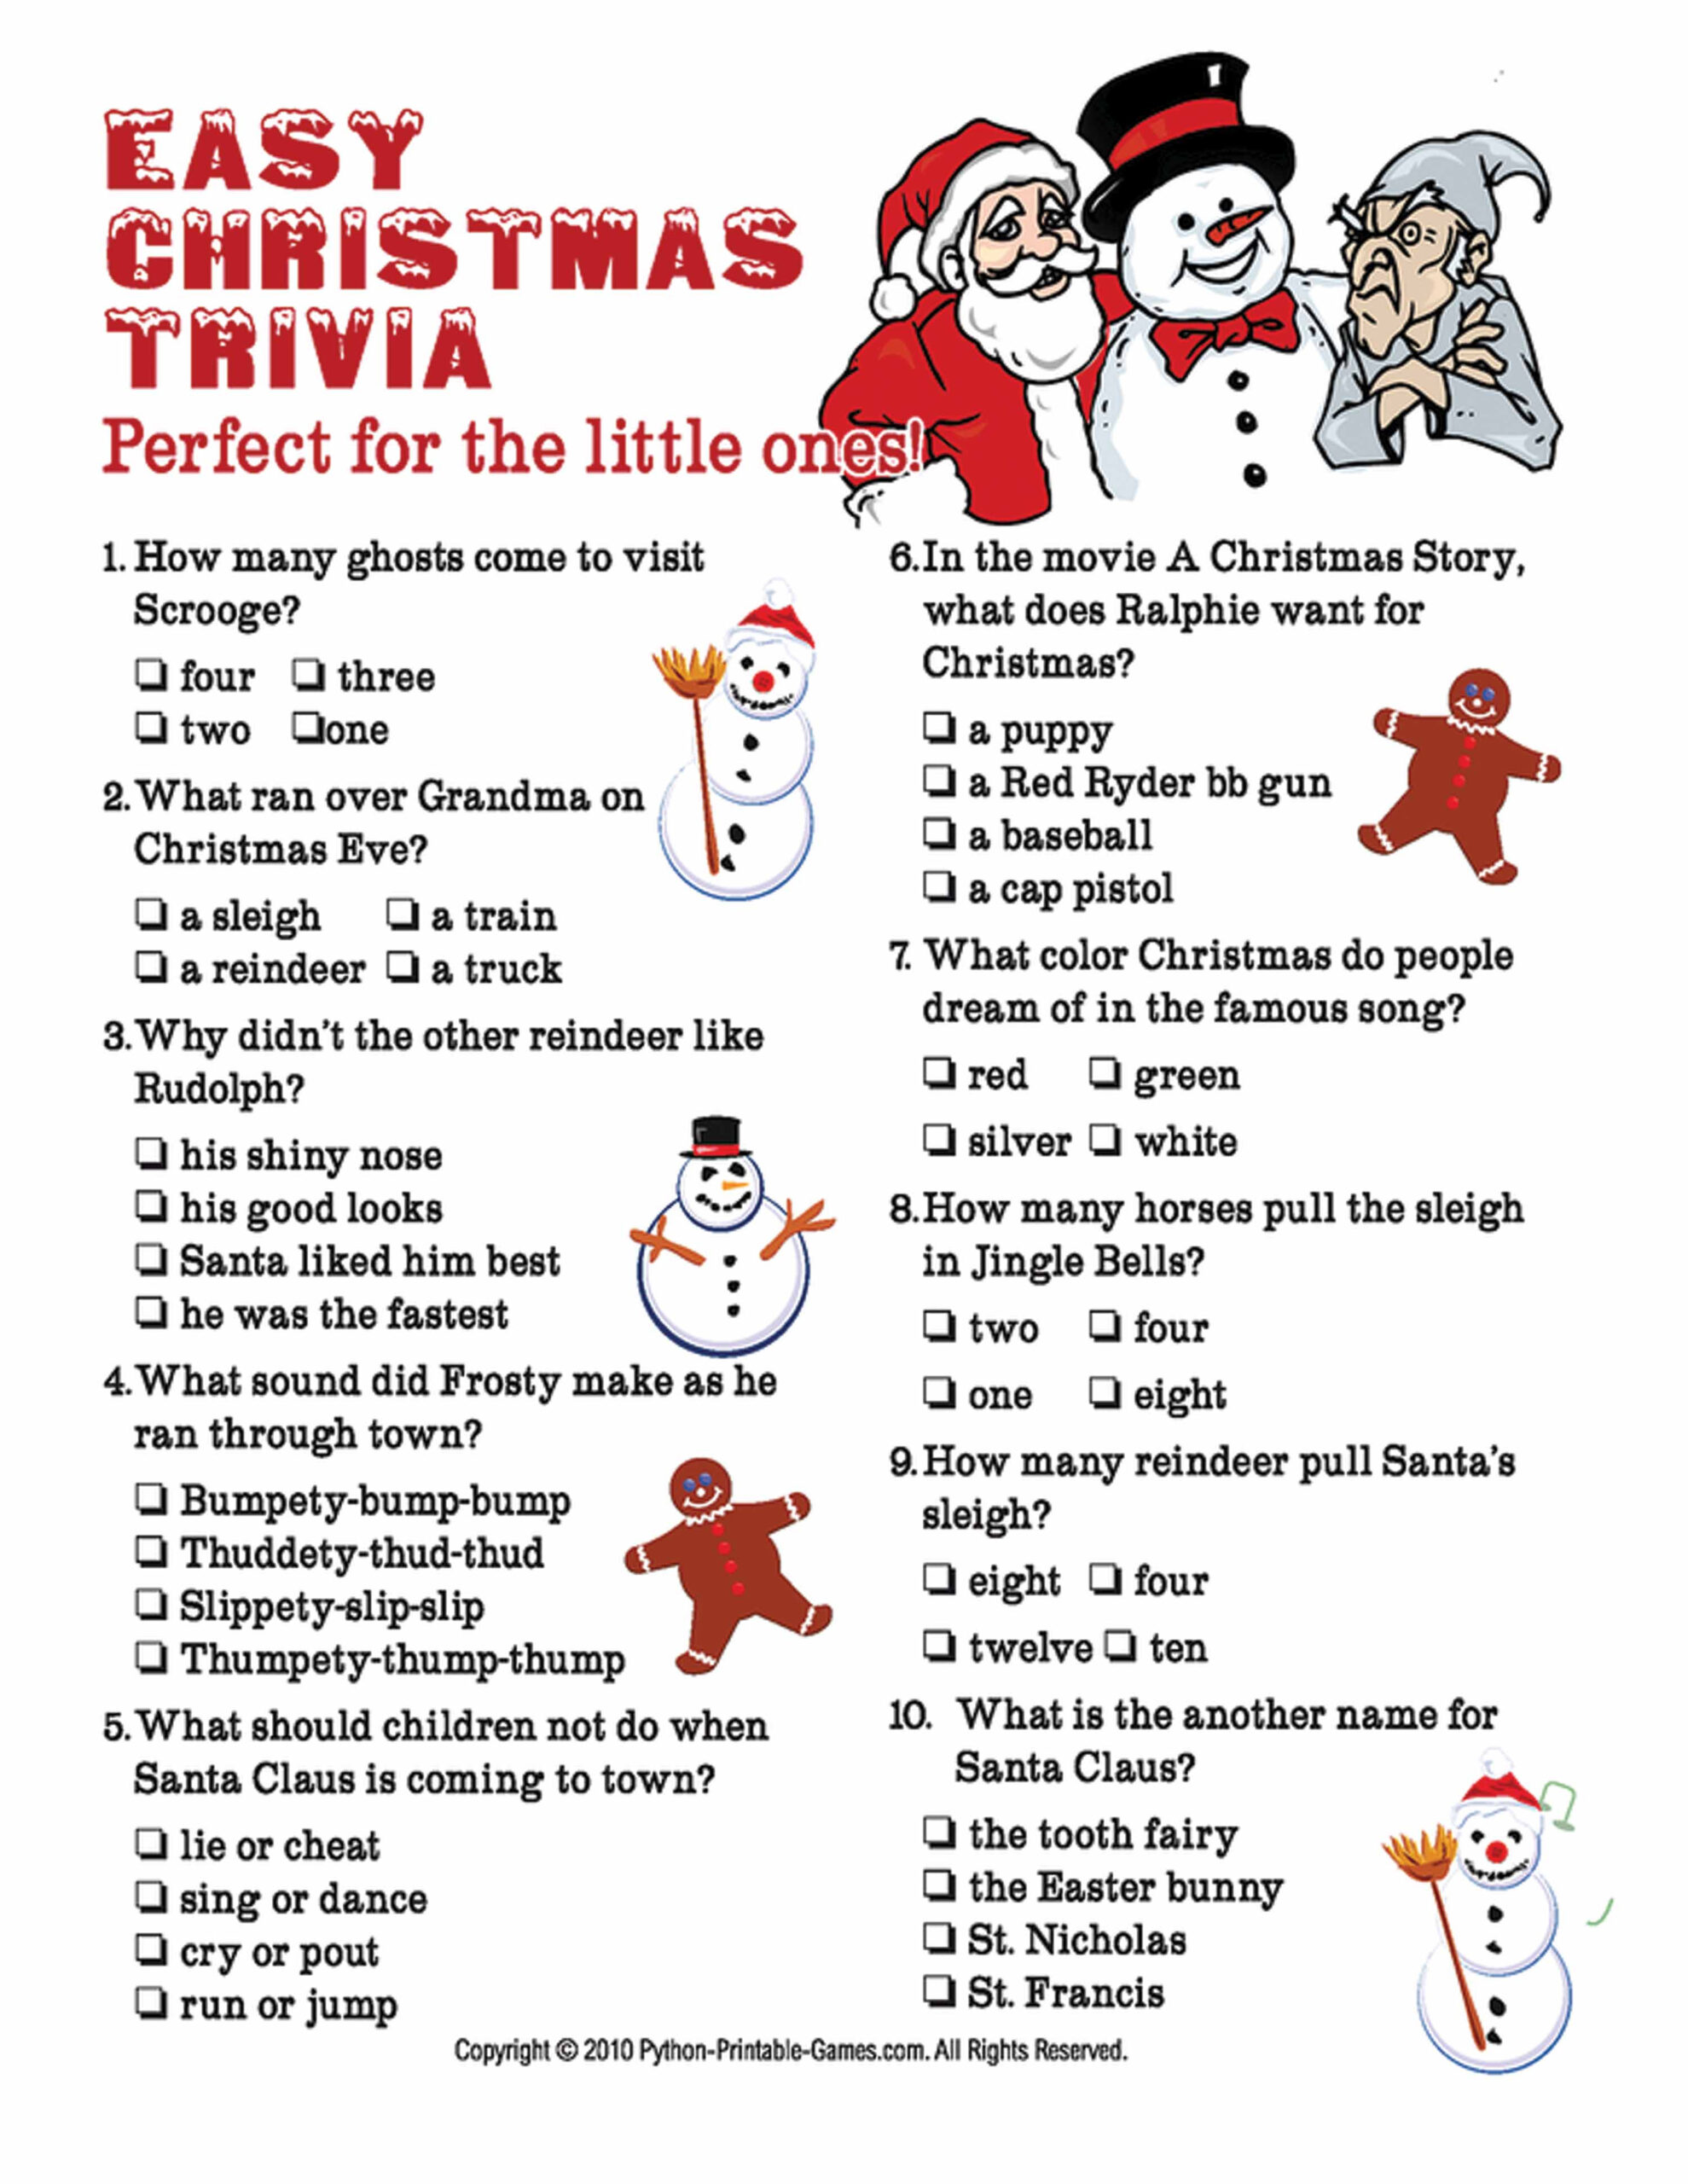 Trivia Questions For Christmas